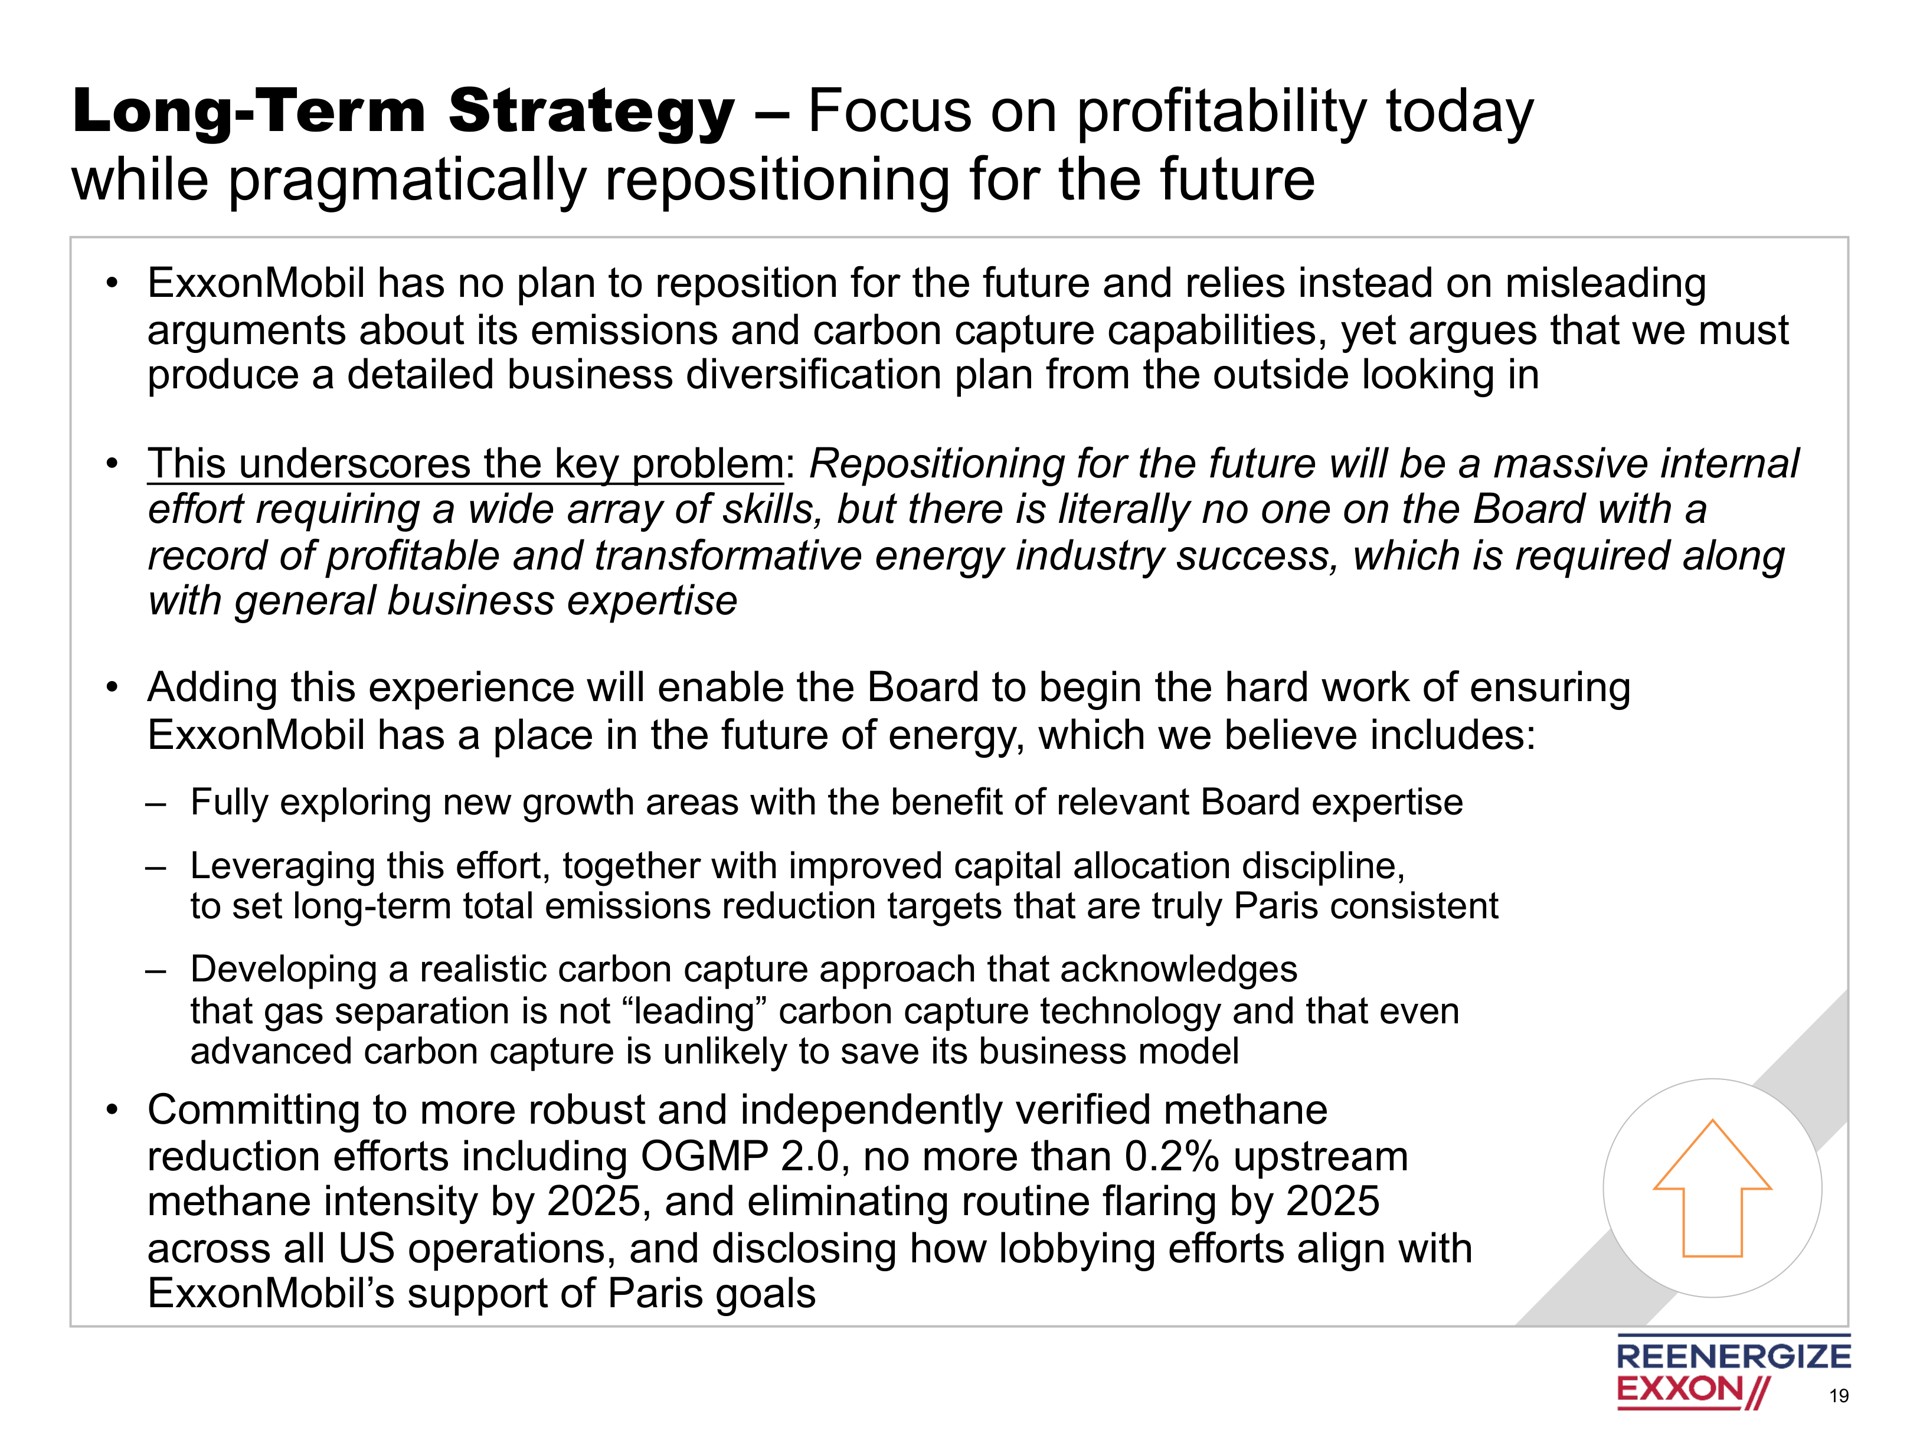 long term strategy focus on profitability today while pragmatically repositioning for the future | Engine No. 1